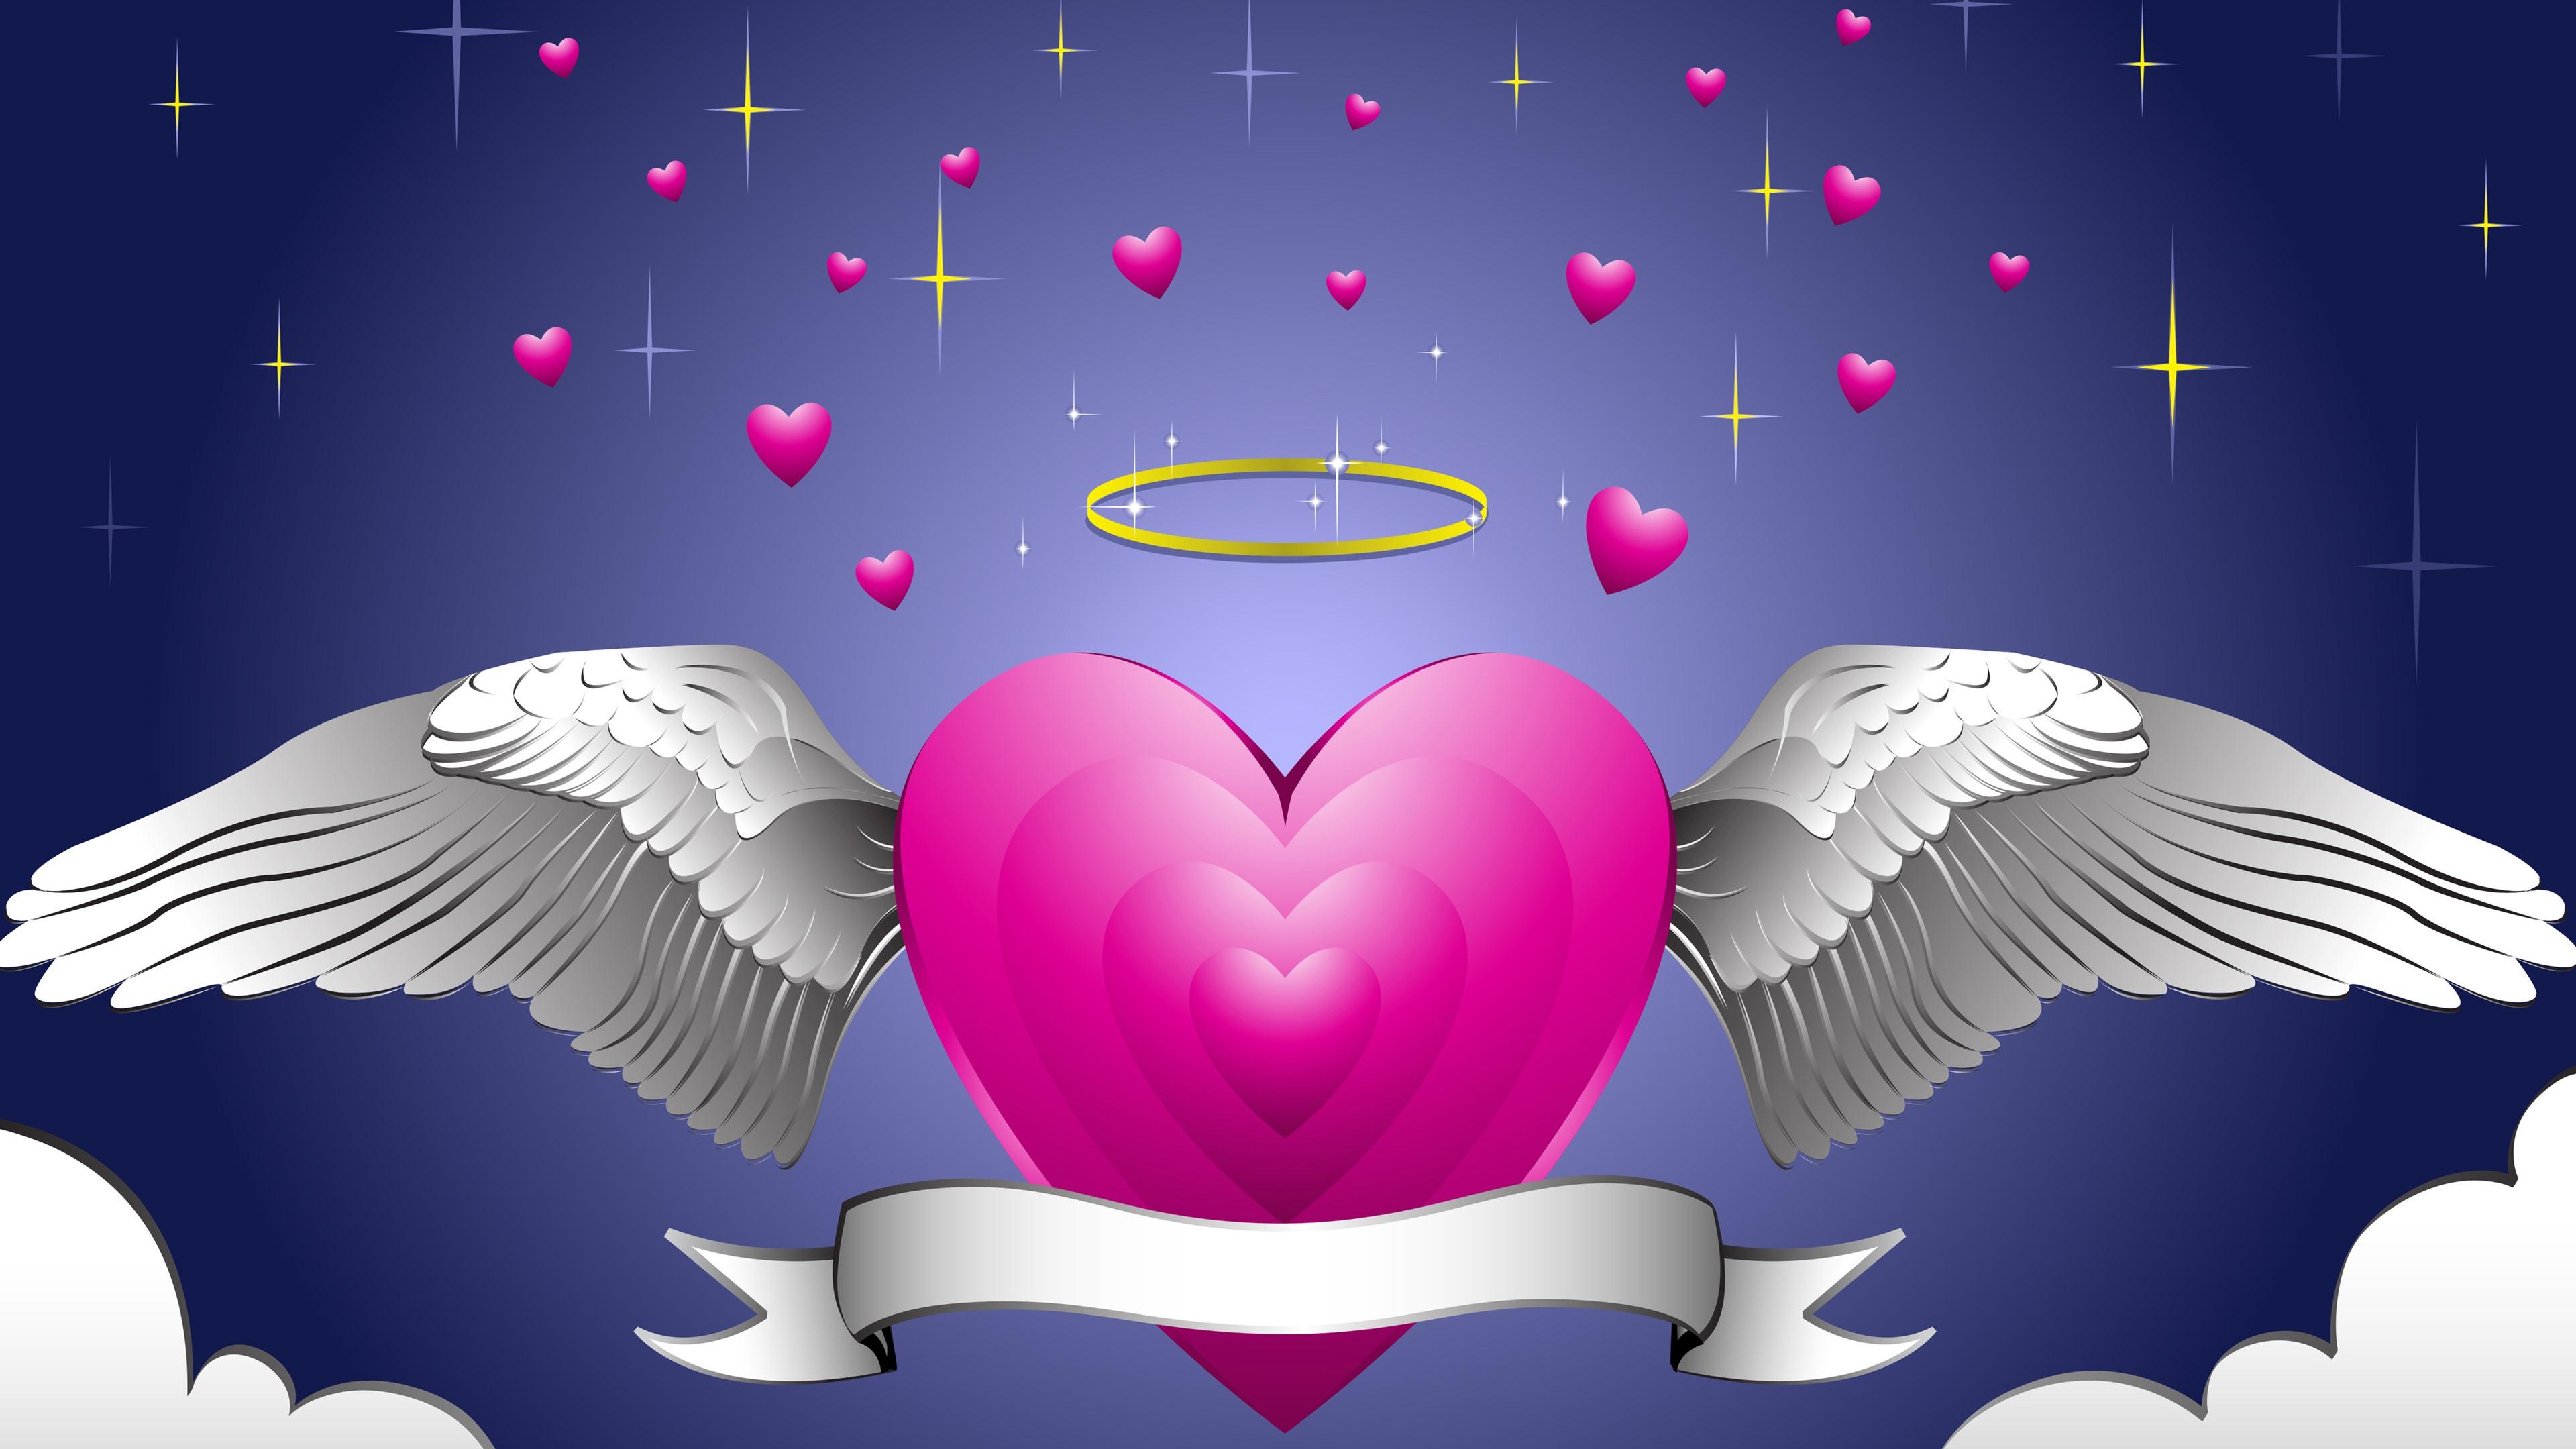 Pink Heart with Wings 4k Ultra HD Wallpaper. Background